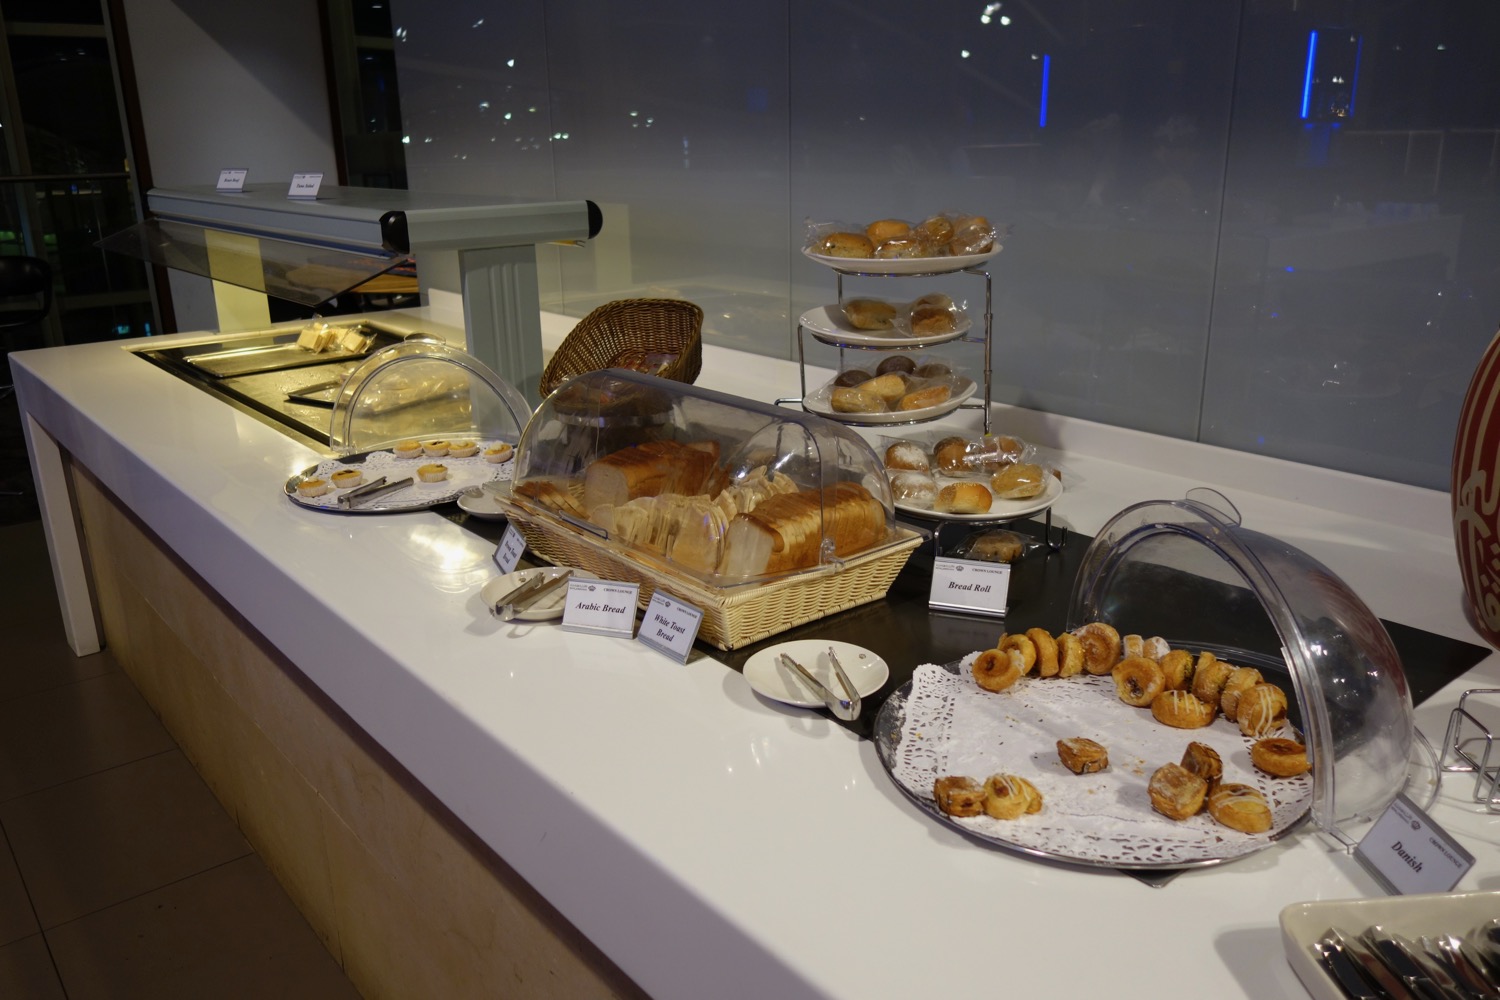 a counter with pastries and pastries